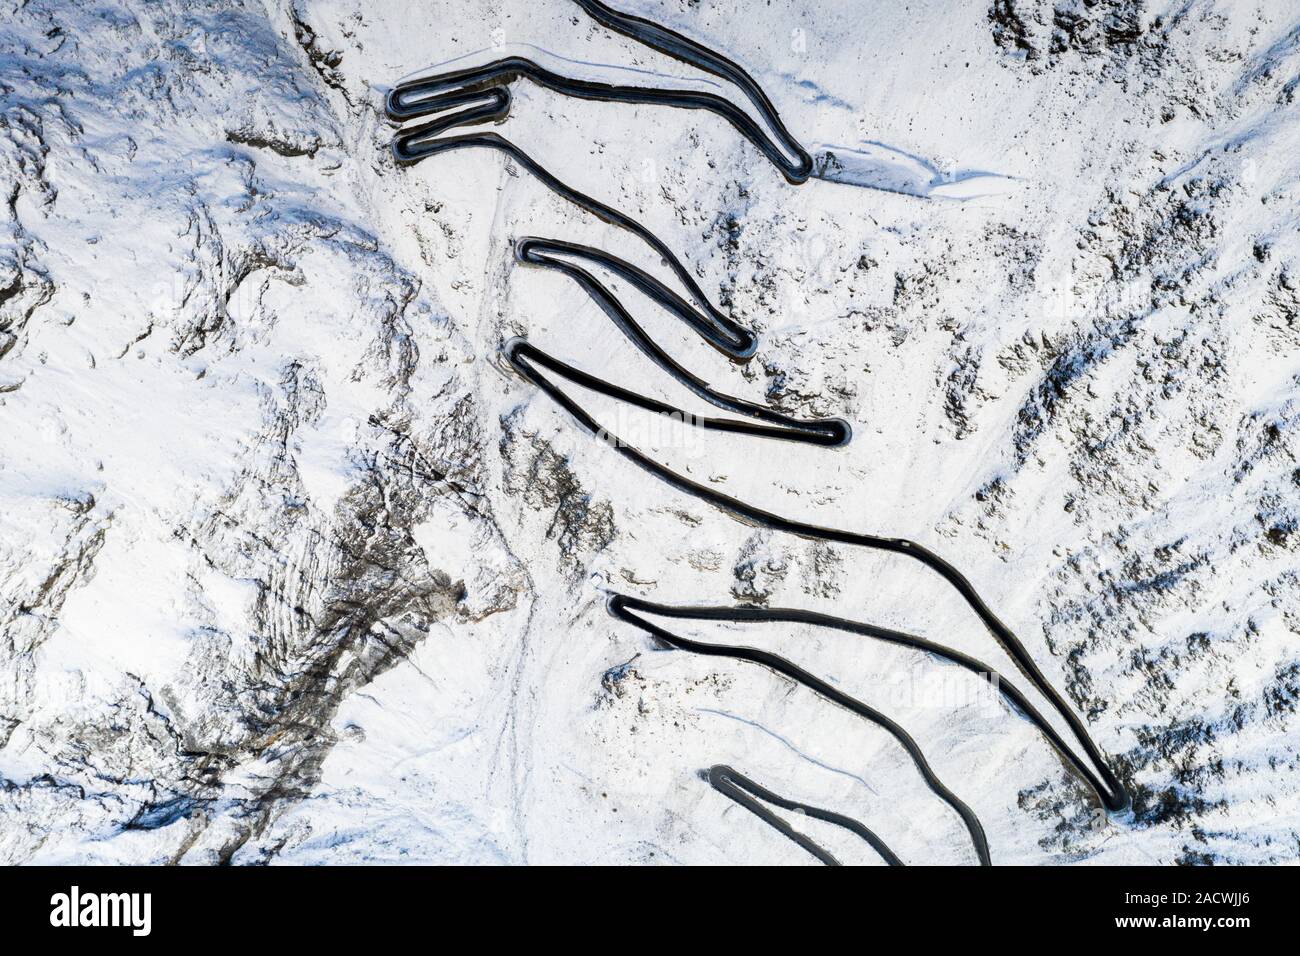 Zig zag shape and steep curves of the snowy Stelvio Pass road from above, Bolzano province, South Tyrol side, Italy Stock Photo